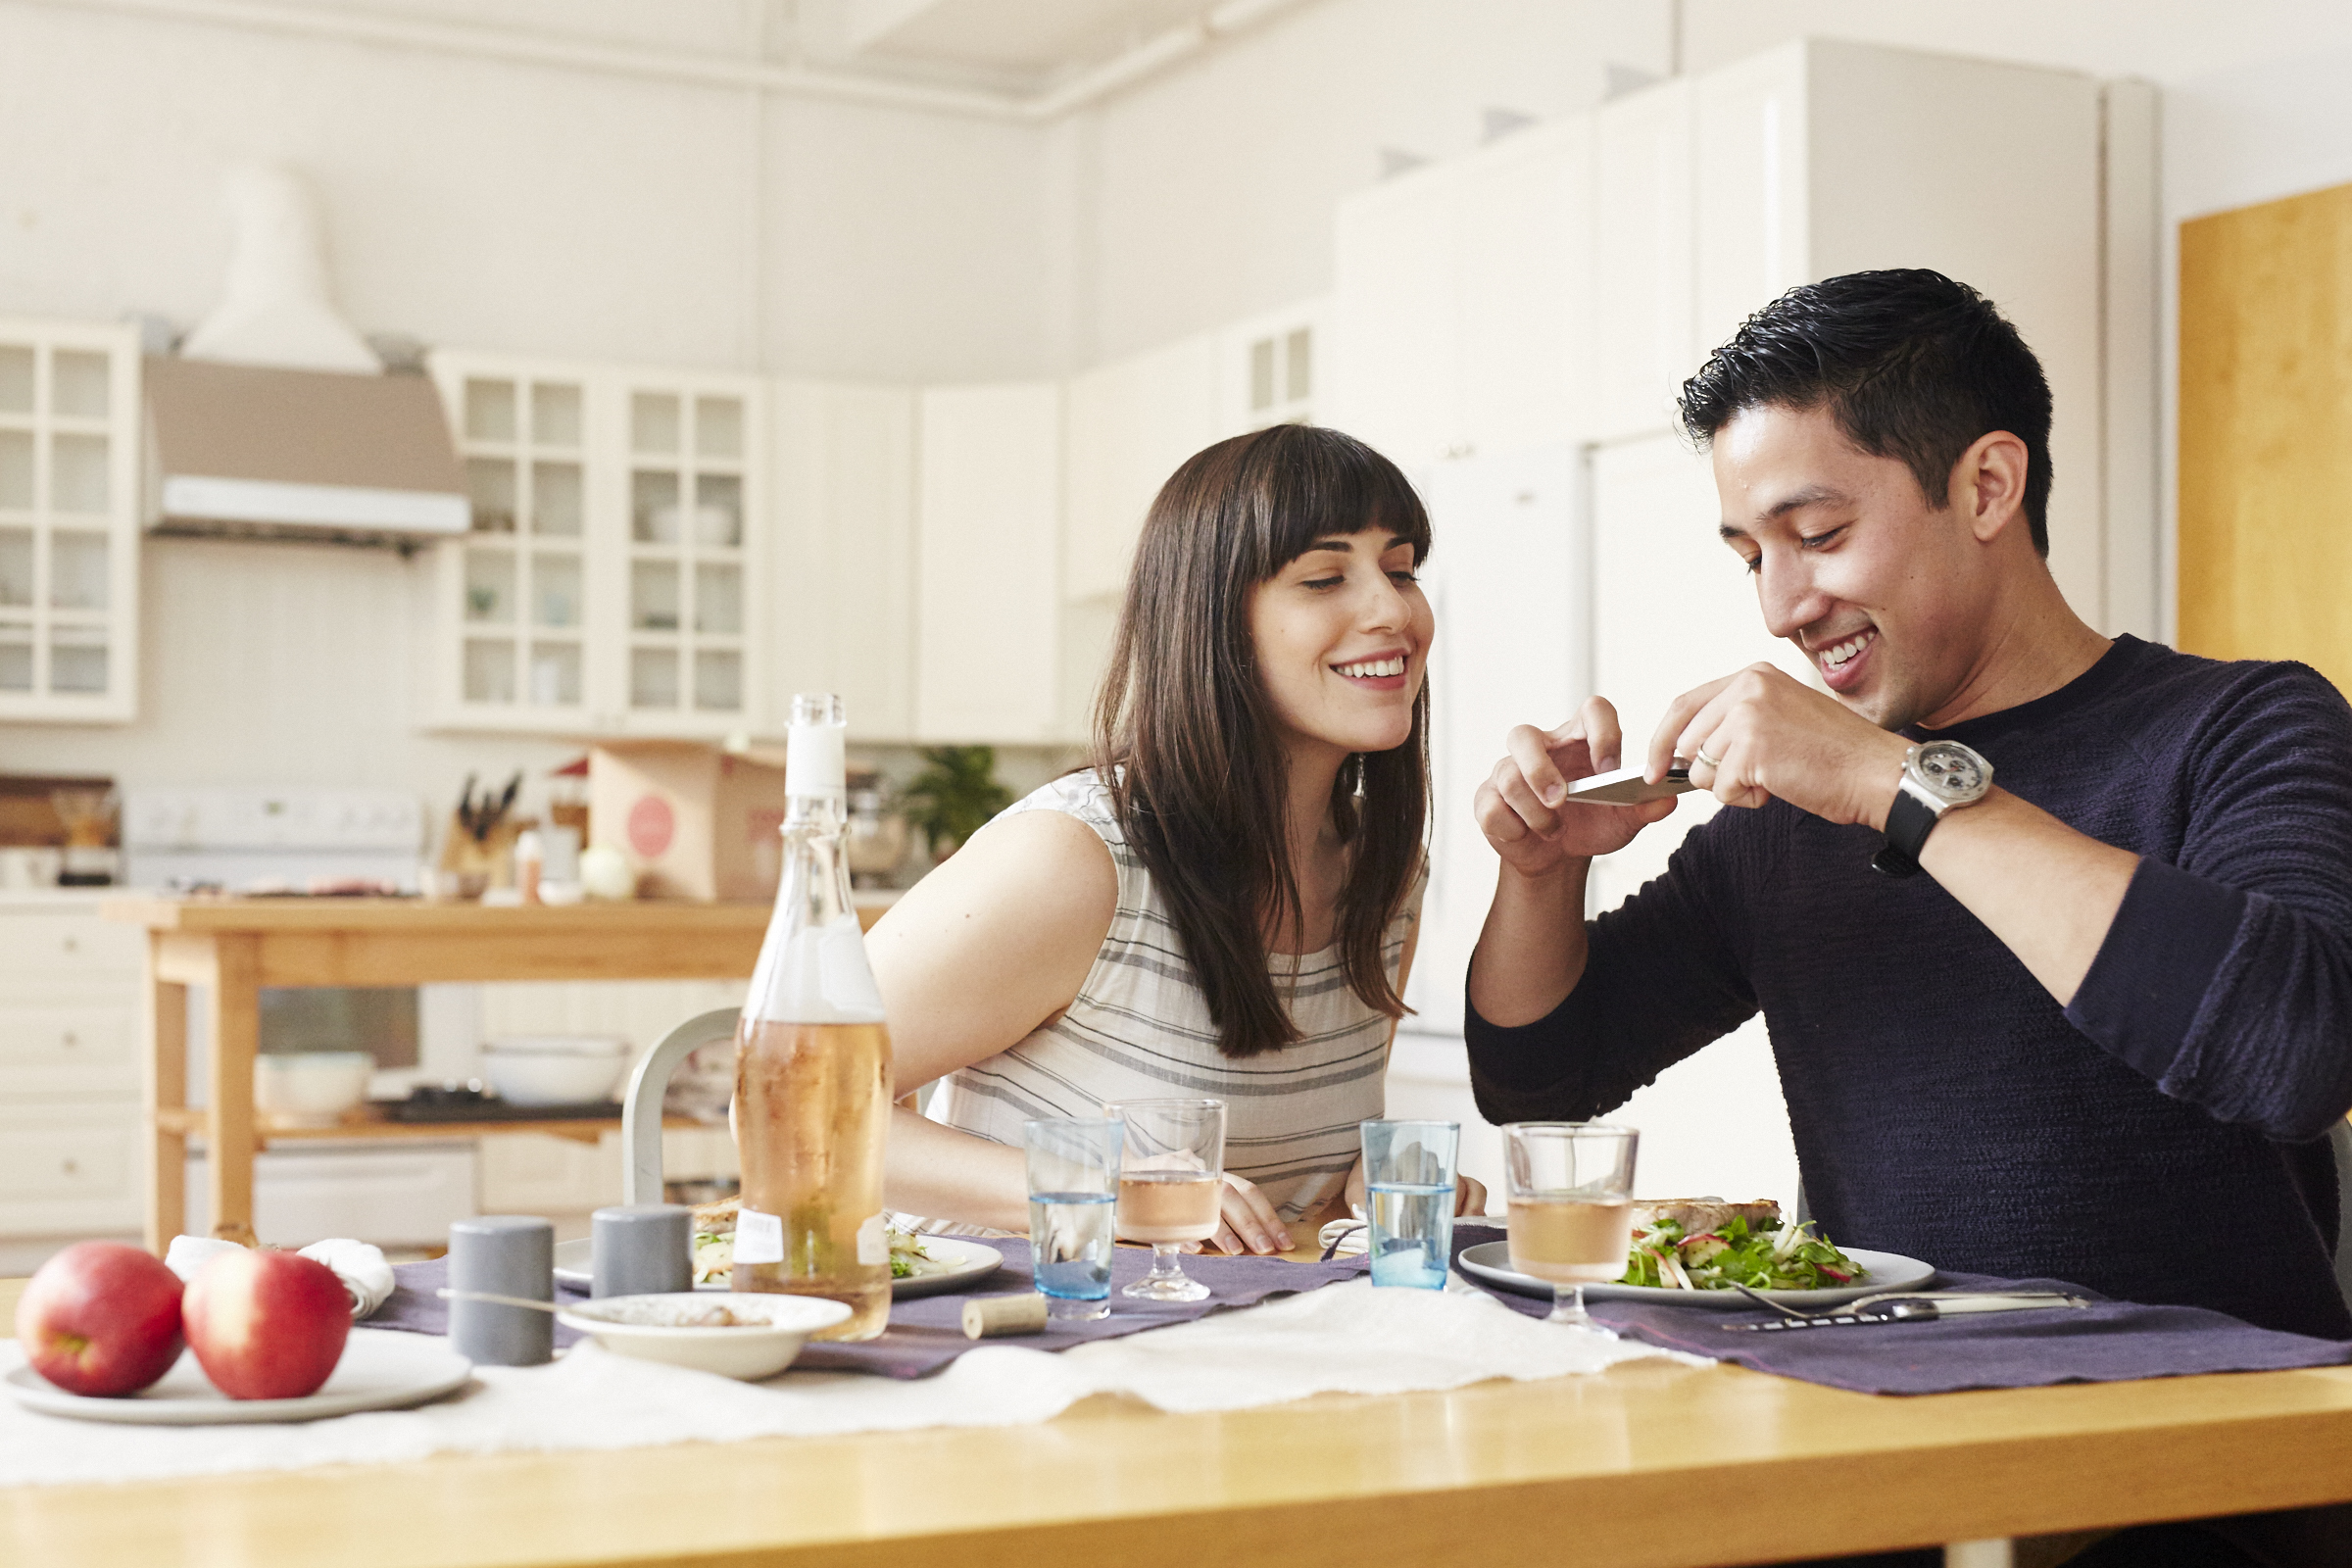 5 Reasons to have your next dinner date night at home